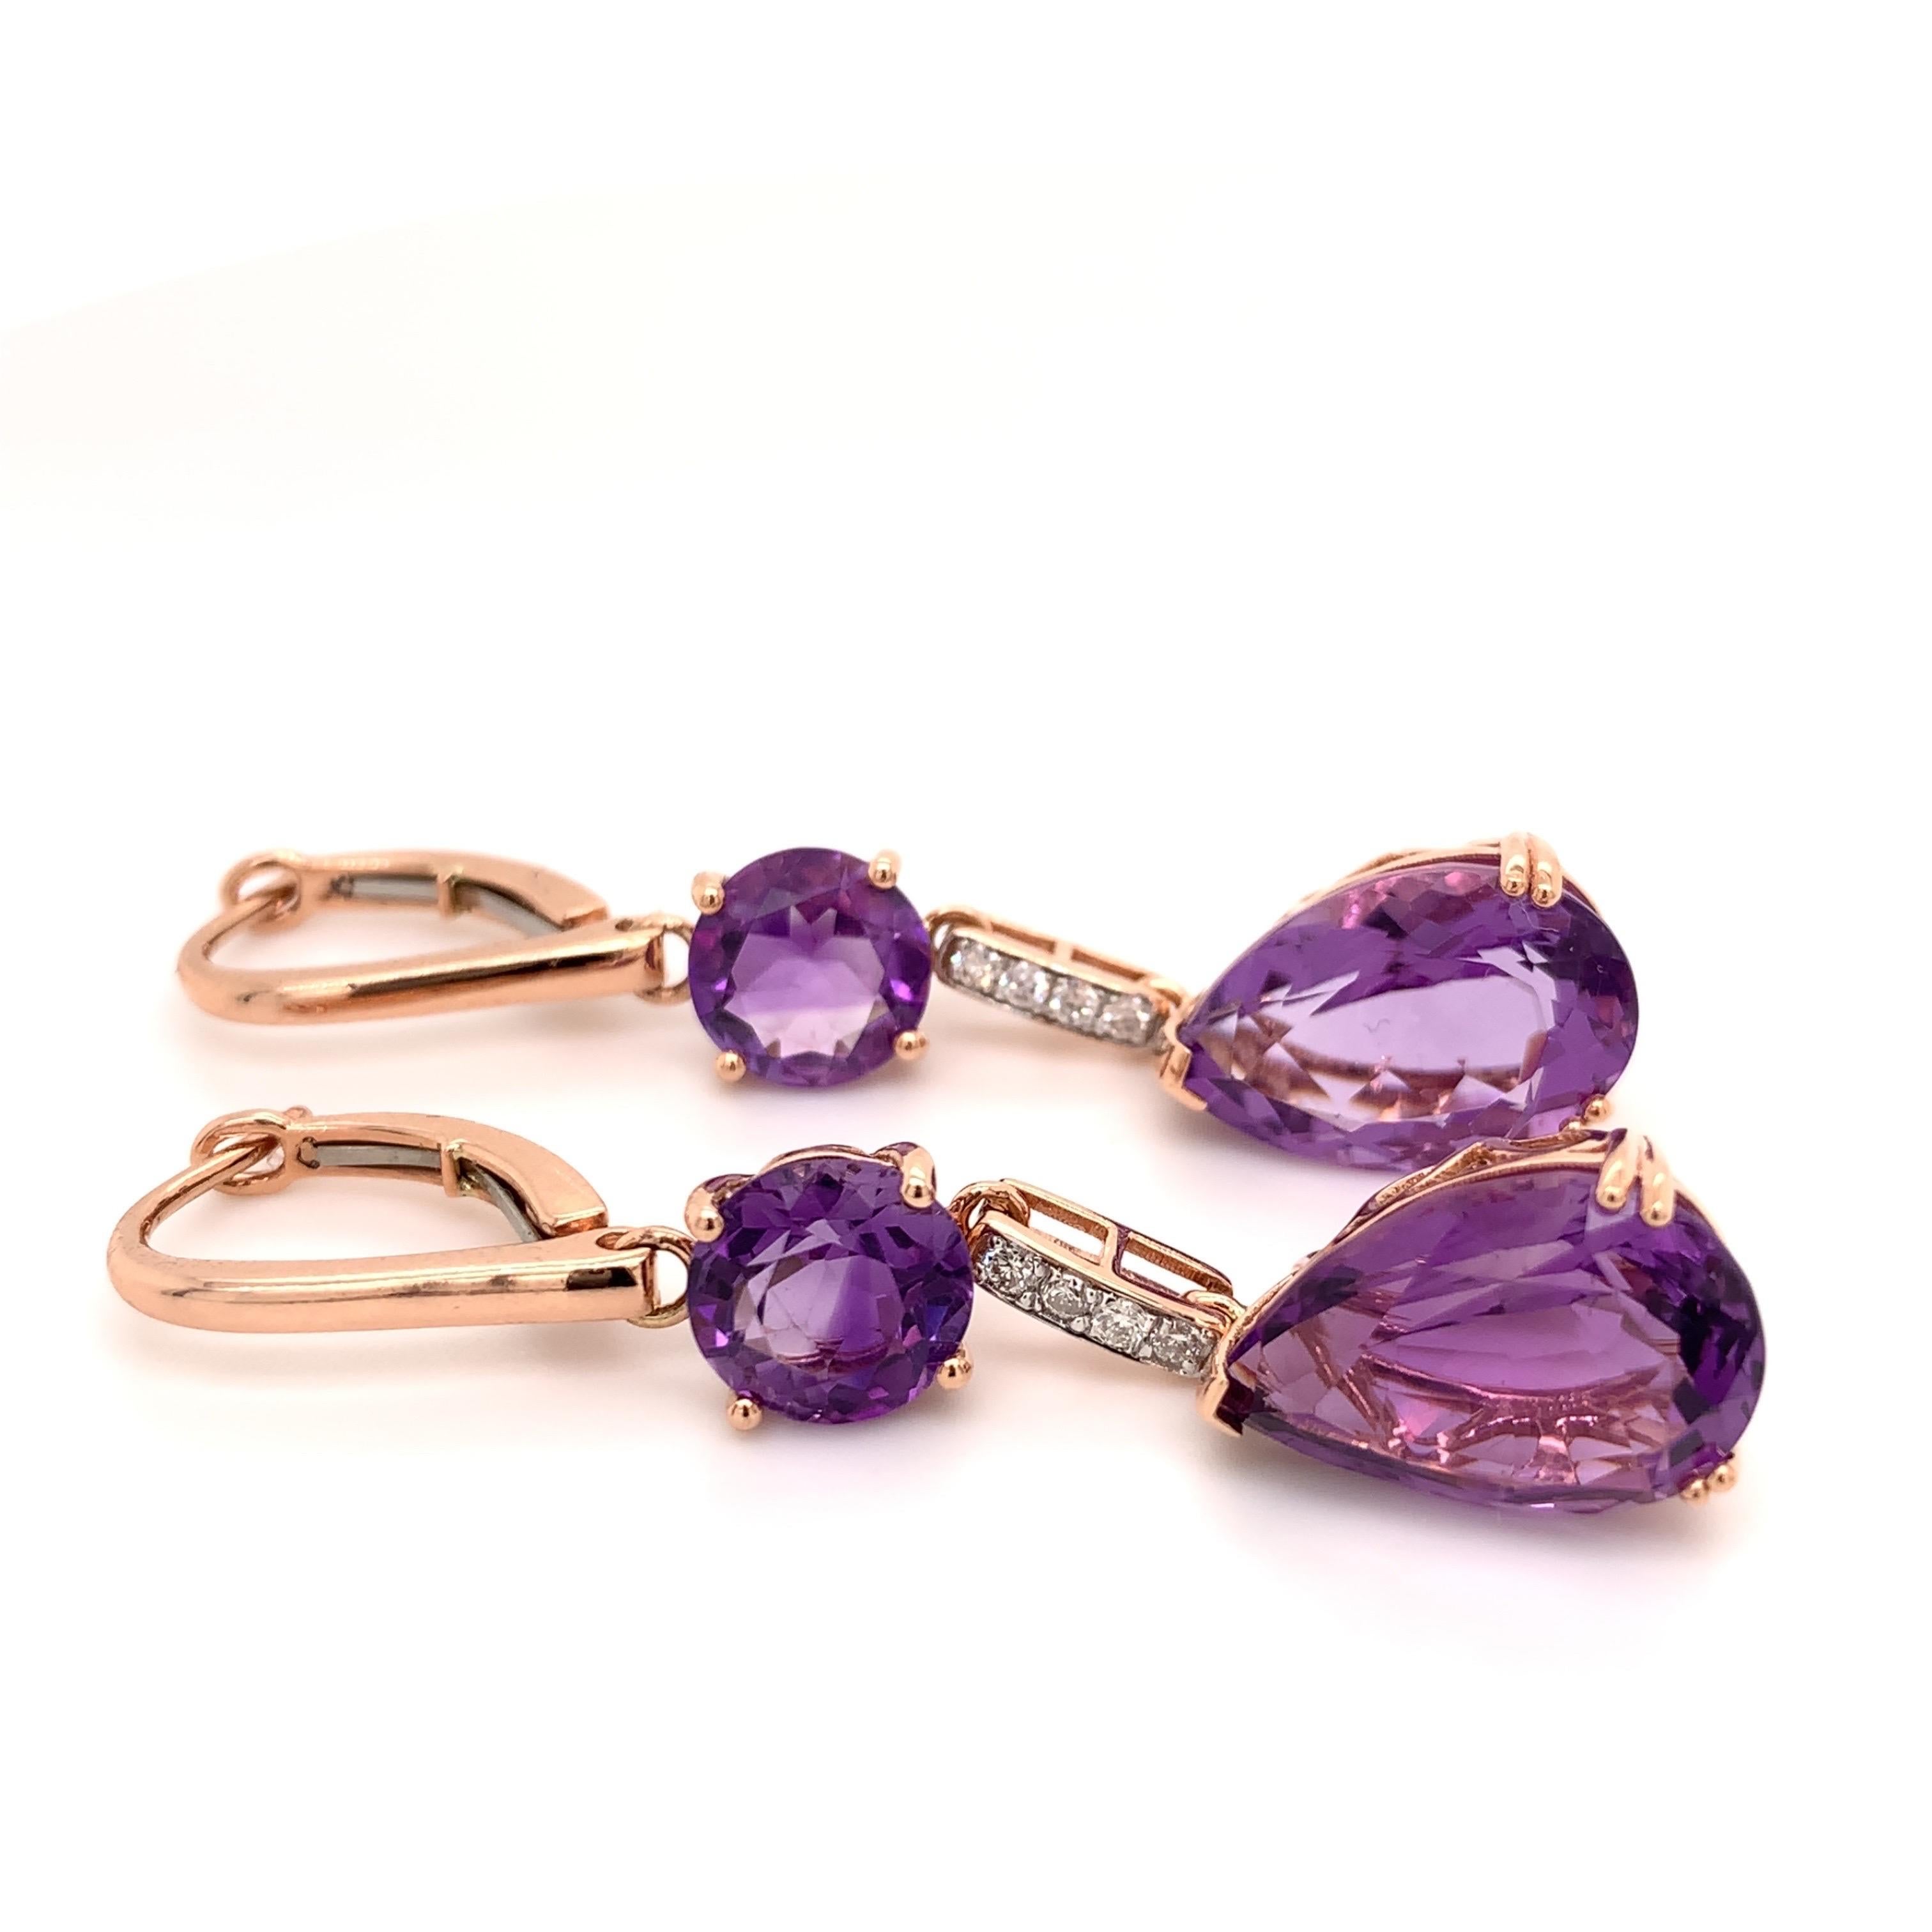 Stunning cocktail dangling amethyst earrings. High brilliance, lively purple tone, transparent clean, round faceted & pear faceted, natural 13.70 carats amethyst mounted with bead prong on high profile open basket, accented with a round brilliant